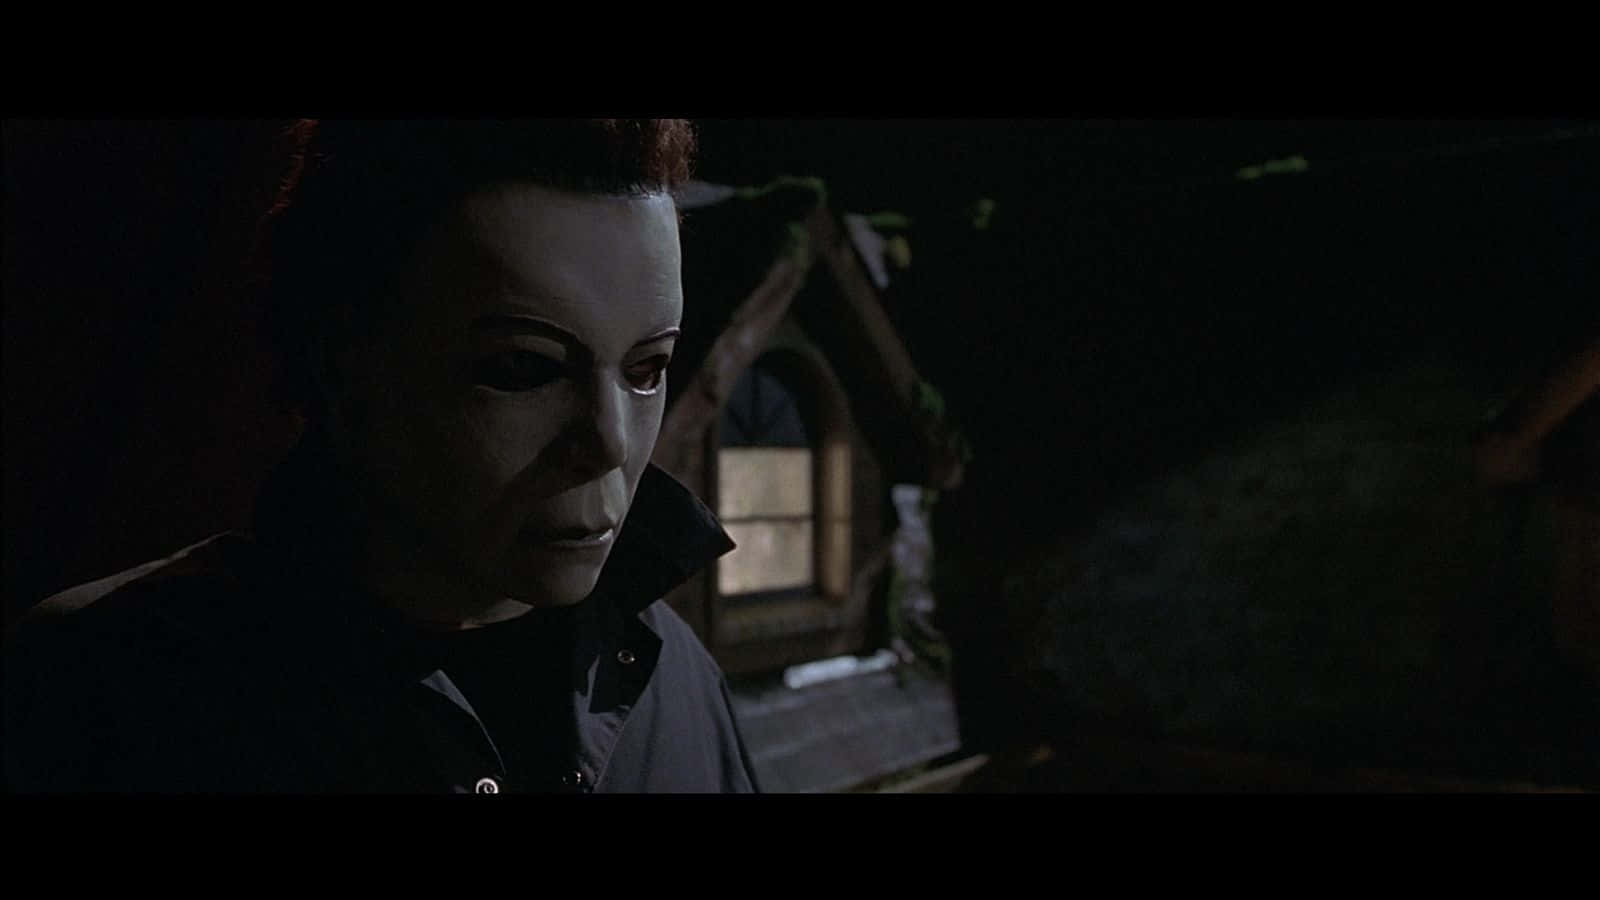 Michael Myers looms in the shadows, ready to strike.